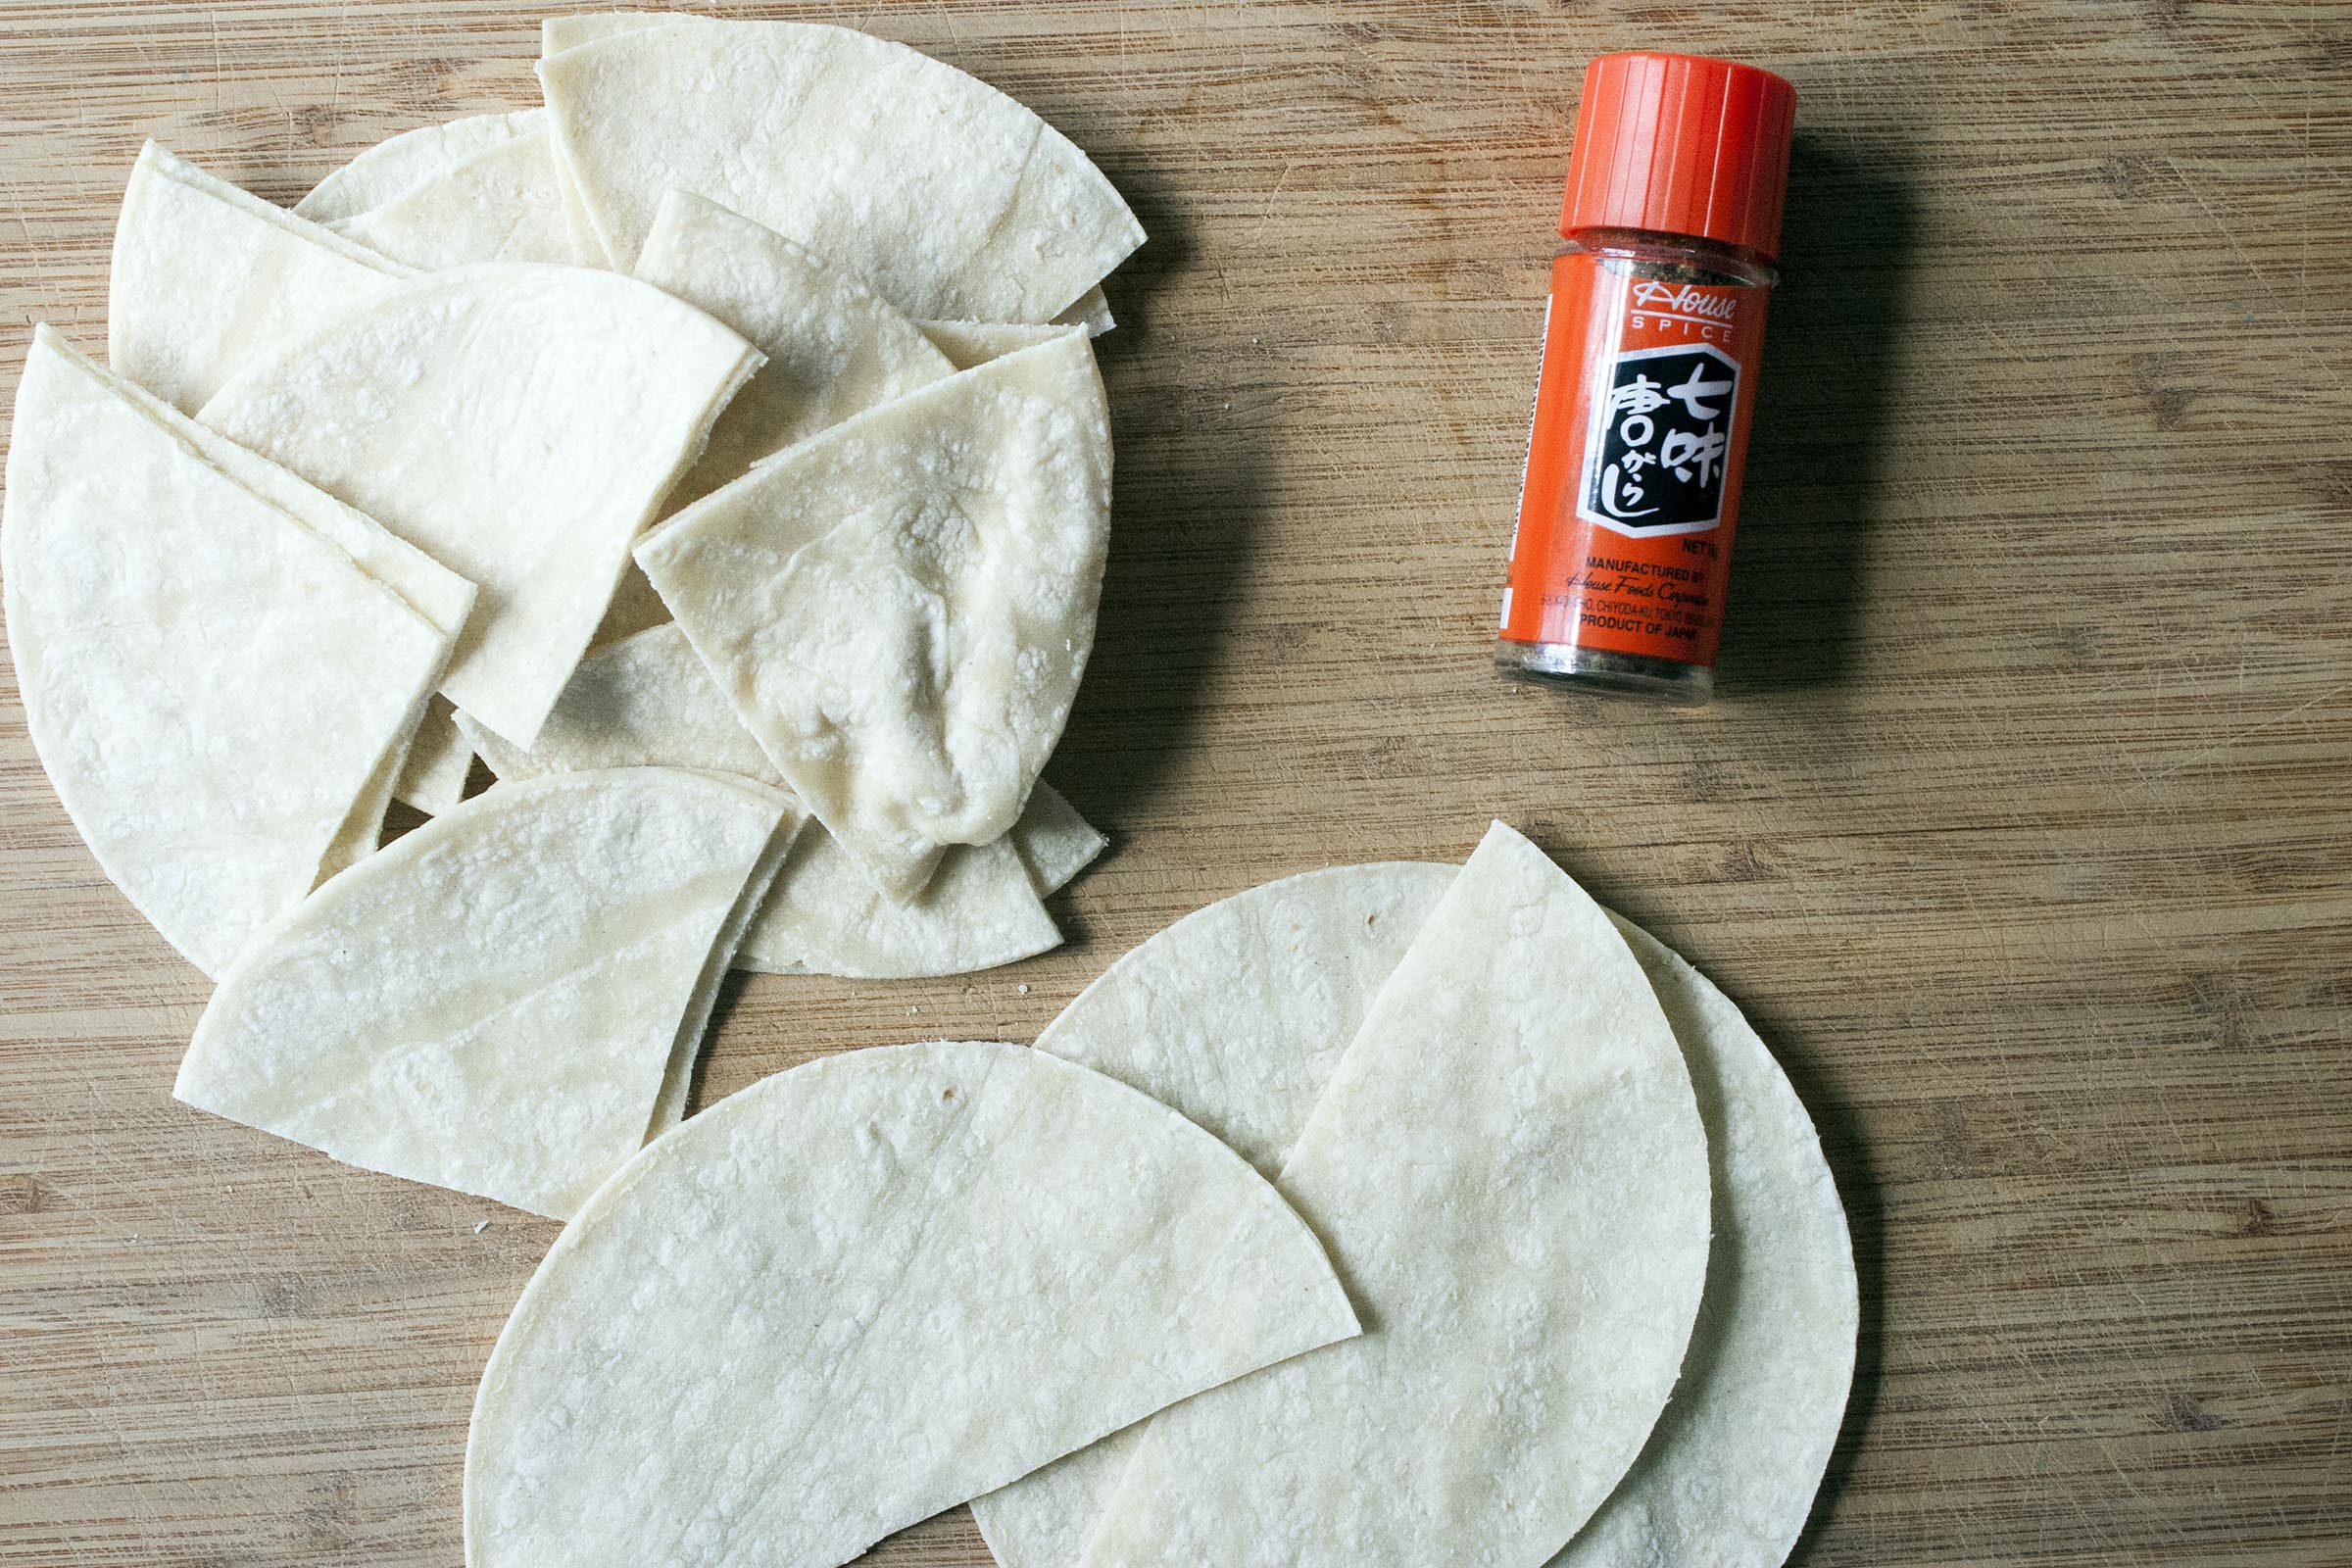 Corn Tortillas and Japanese 7 Spice Seasoning Blend for Tortilla Chips. www.lifeaswecookit.com